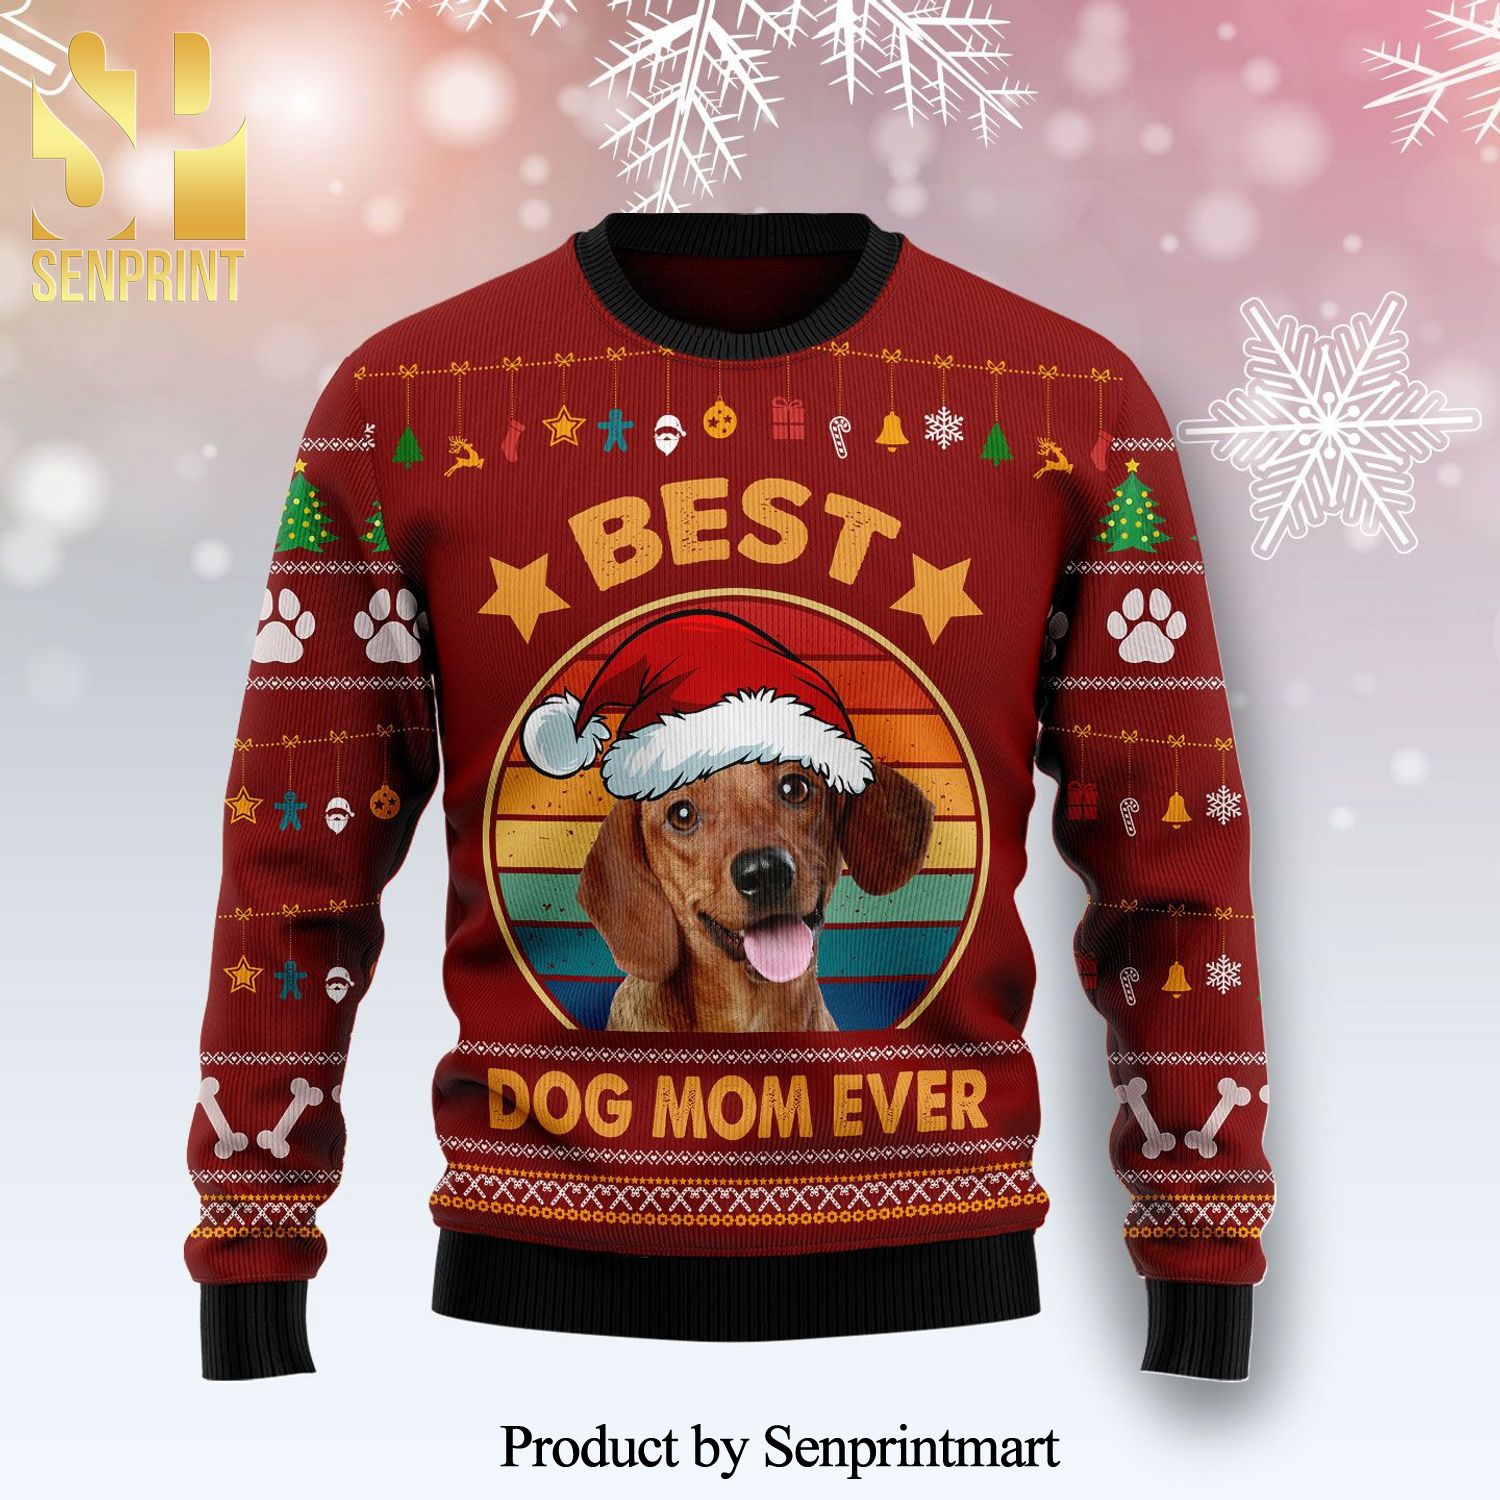 Dachshund Best Dog Mom Ever Knitted Ugly Christmas Sweater